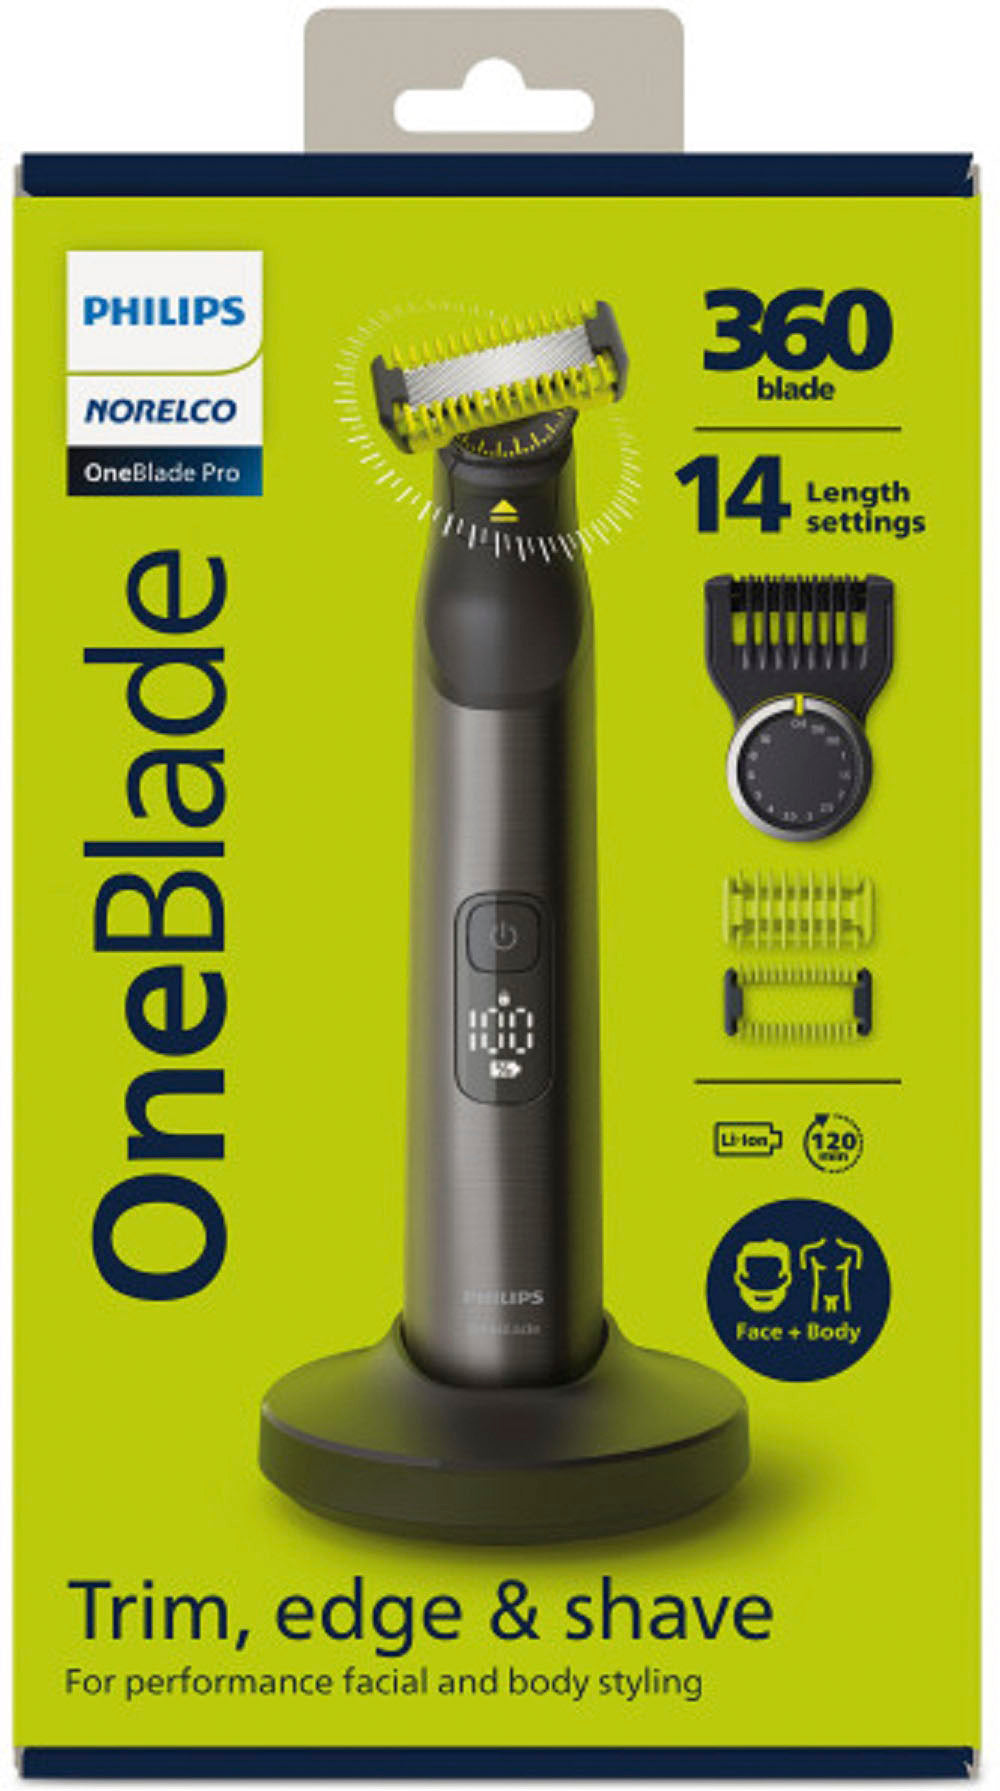 Philips Norelco - Philips Norelco, OneBlade 360, Pro Face & Body, Hybrid Electric Trimmer and Shaver, QP6551/70 - Chrome_4